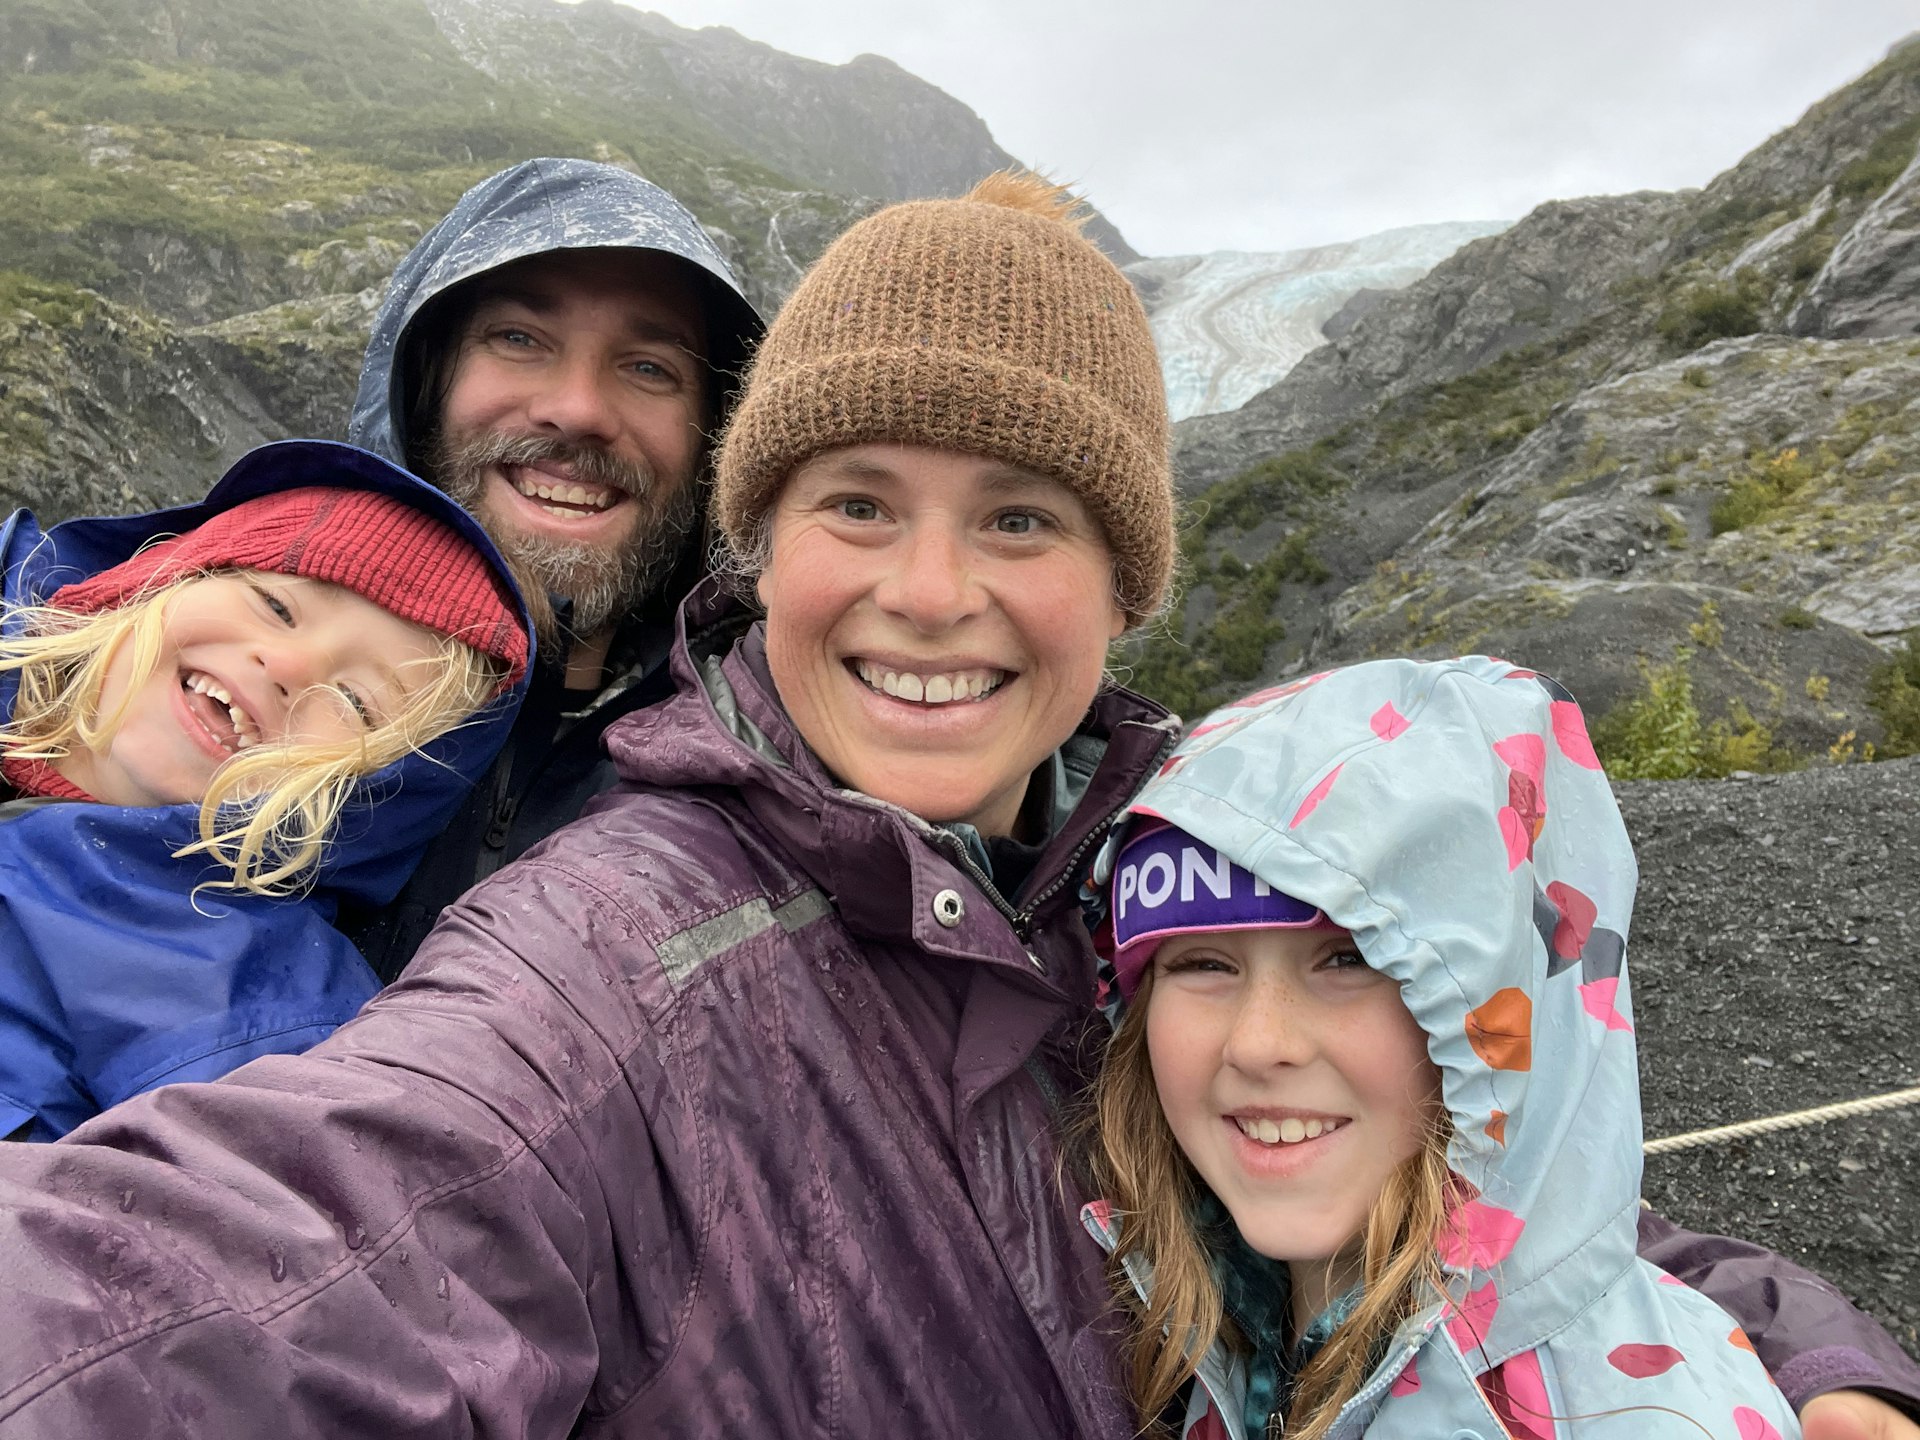 Sarah and her family smile in waterproof after hiking through Kenai Fjords National Park to the Exit Glacier